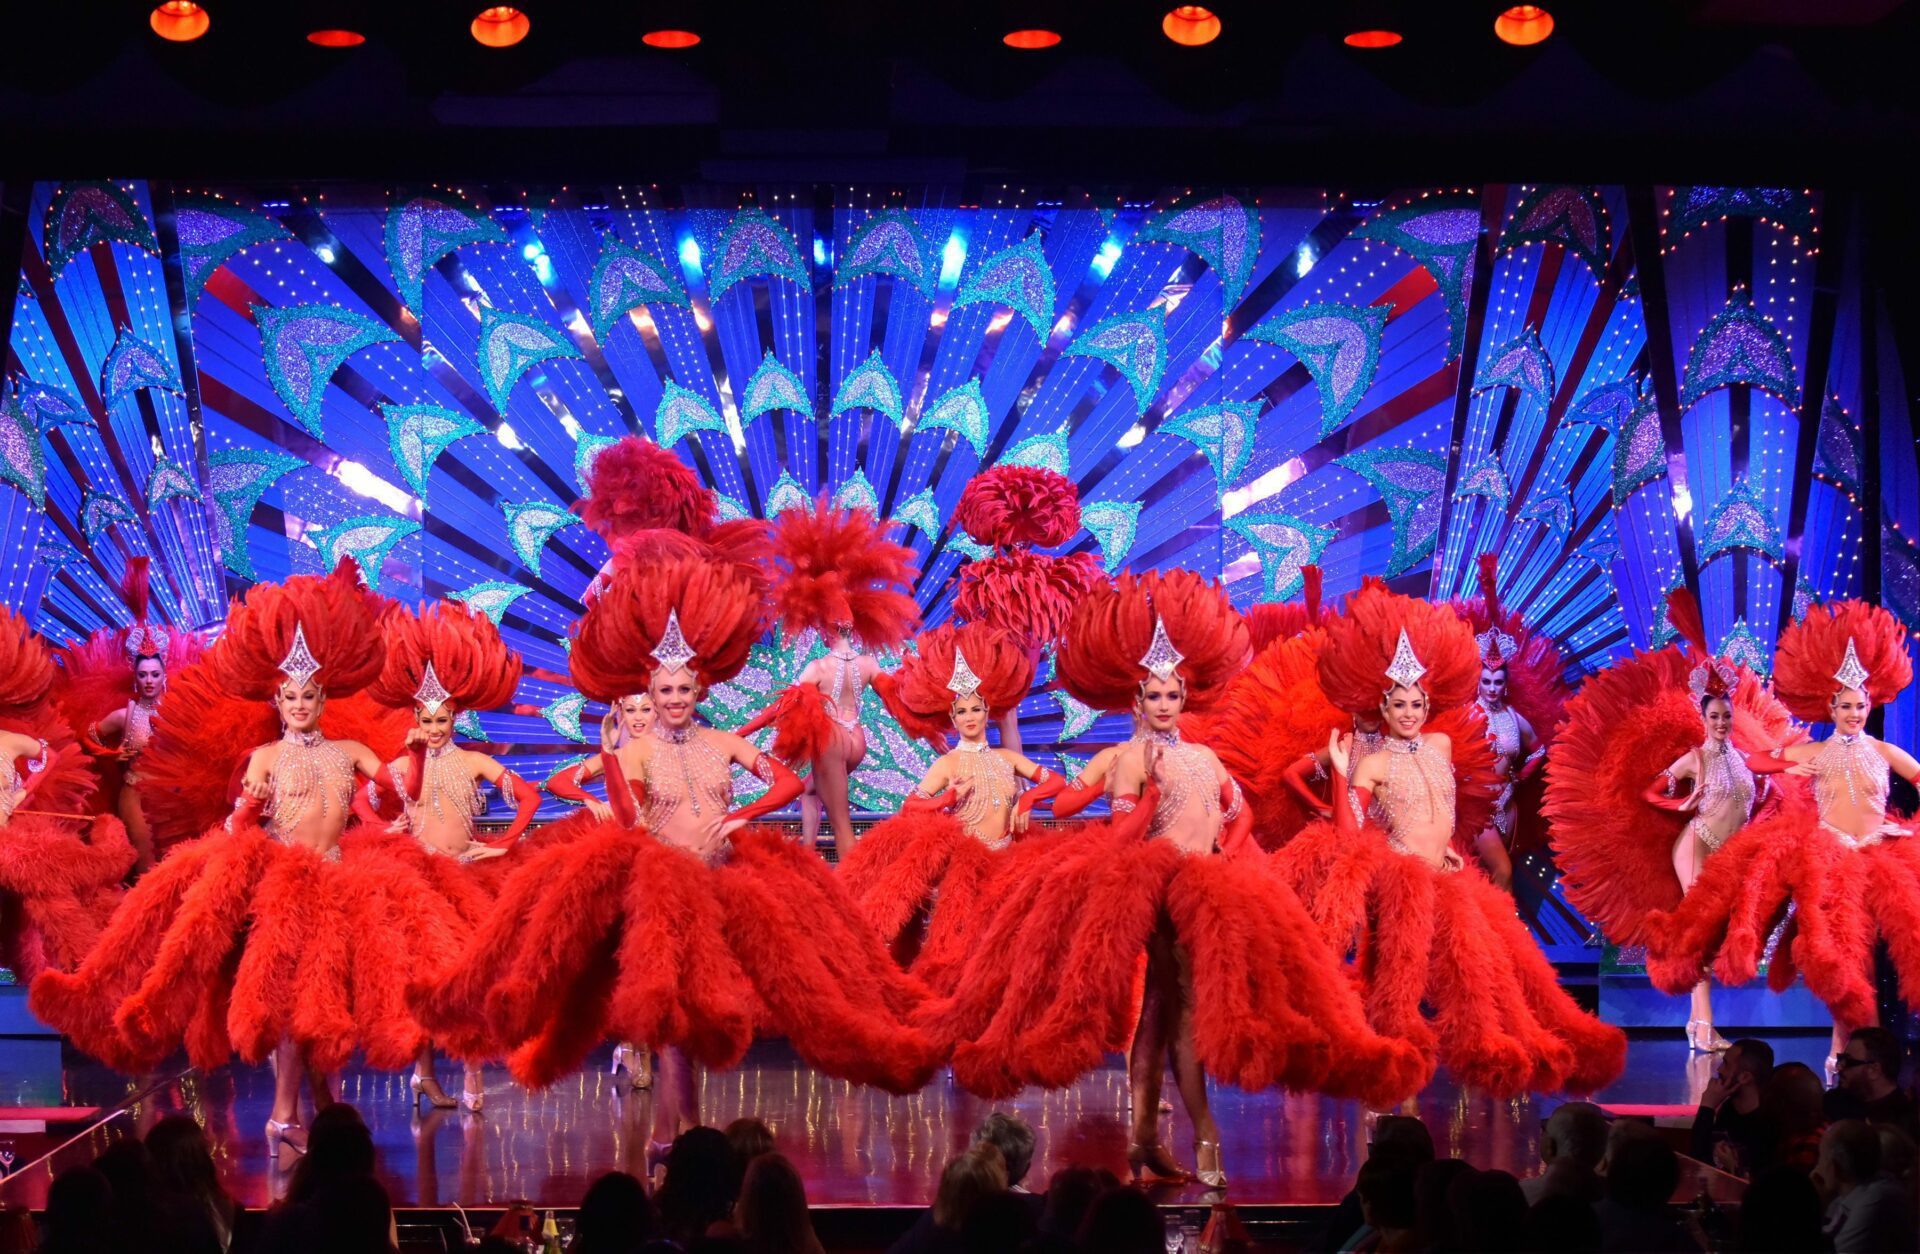 Dancers performing in red dresses with feathers on stage